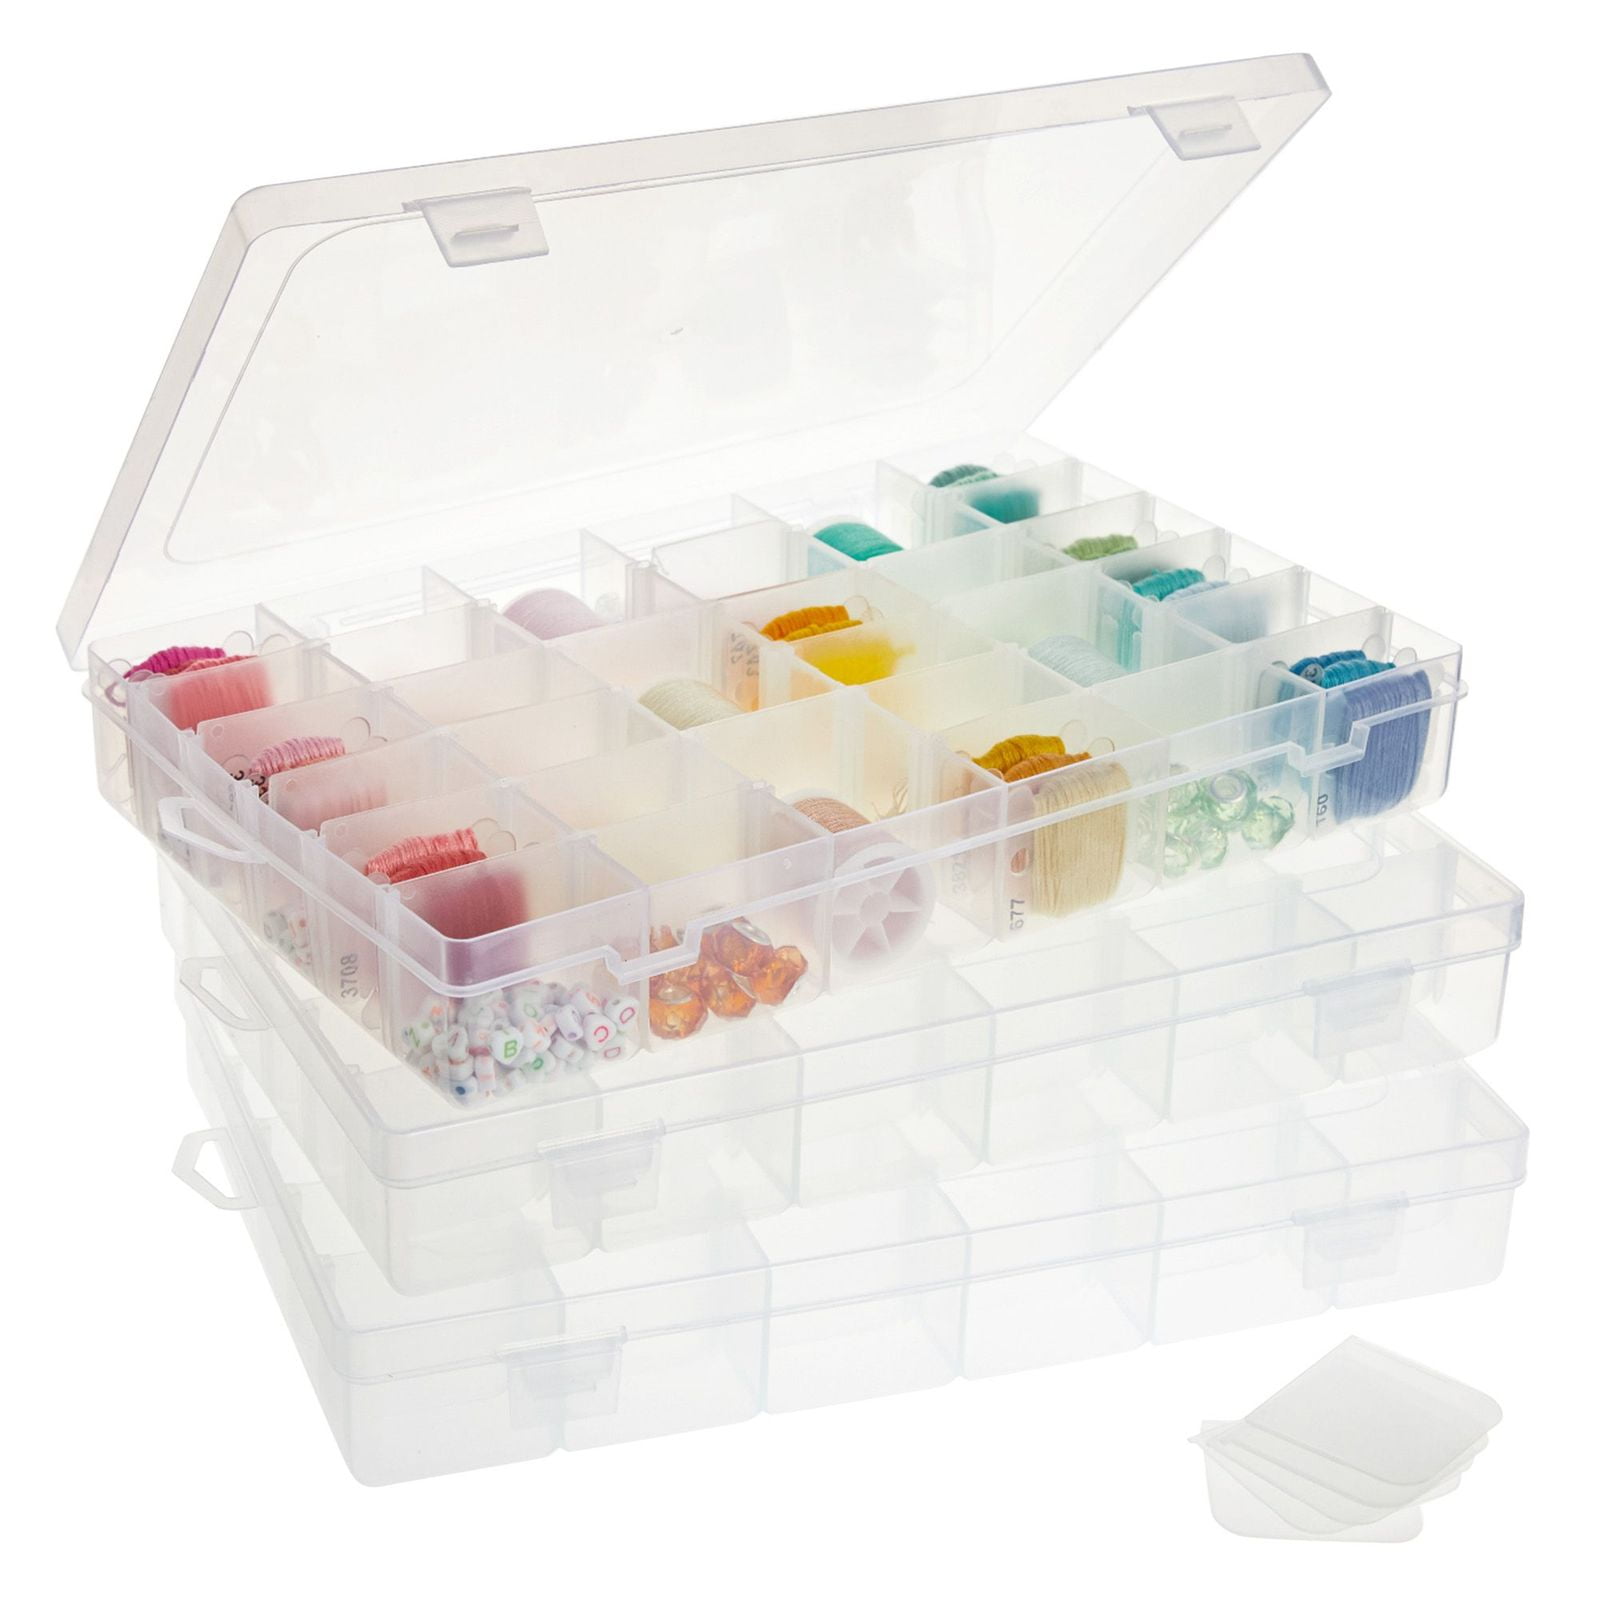 24 Grids Jewelry Divider Box Organizer Clear Plastic Bead Case Storage Container 